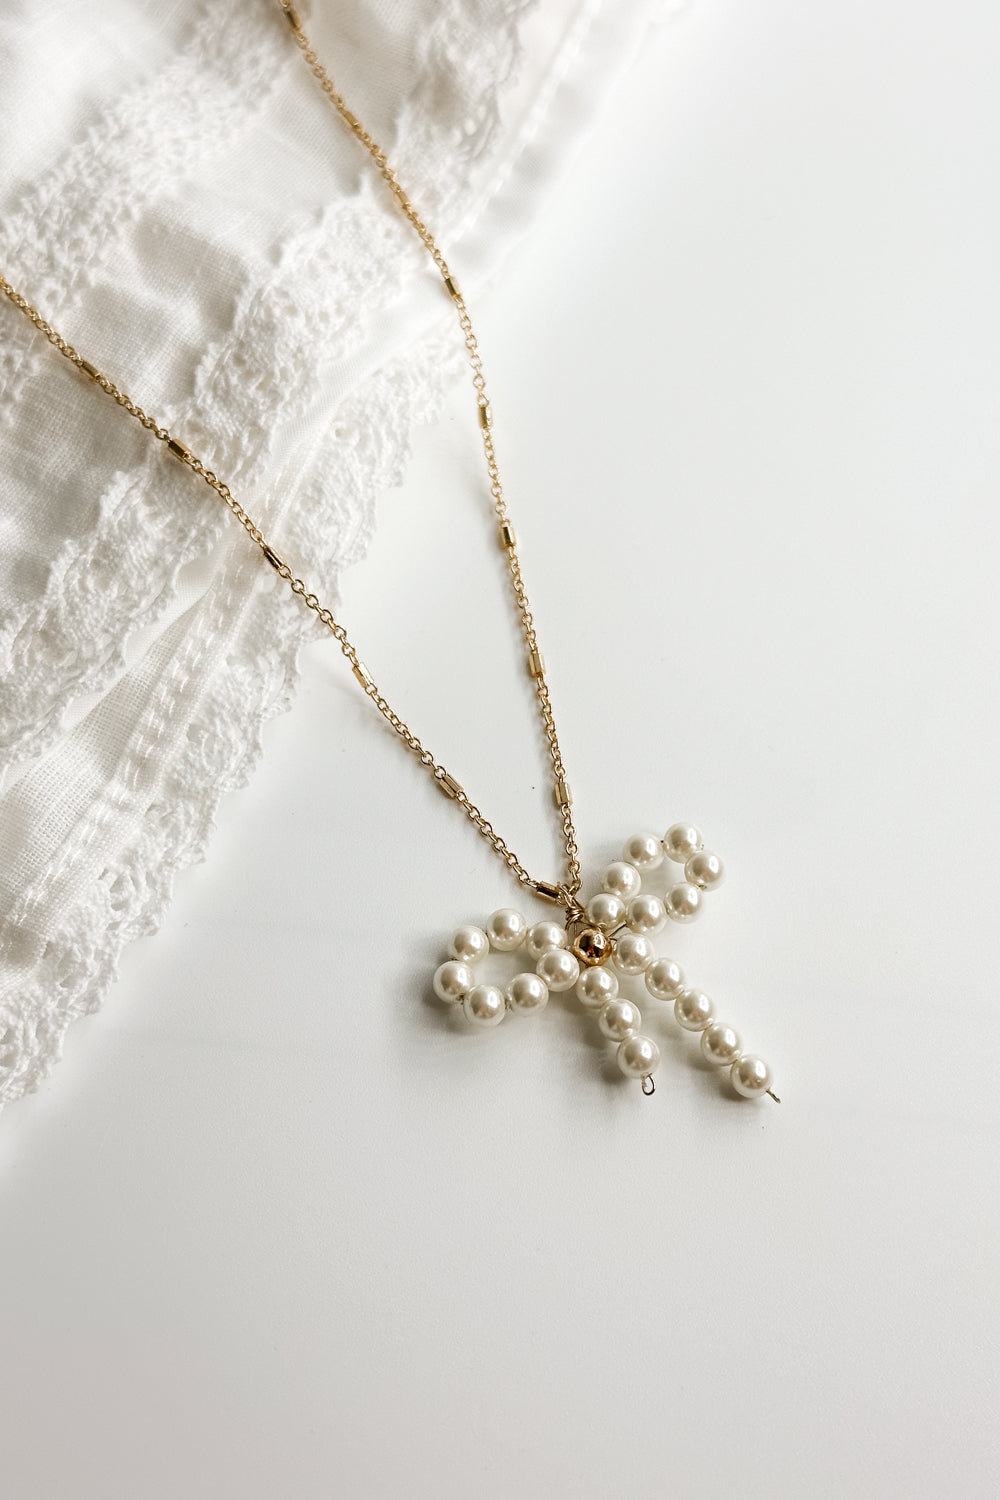 Close up view of the Mia Gold & Pearl Bow Necklace which features adjustable gold chain link with pearl bow attachment